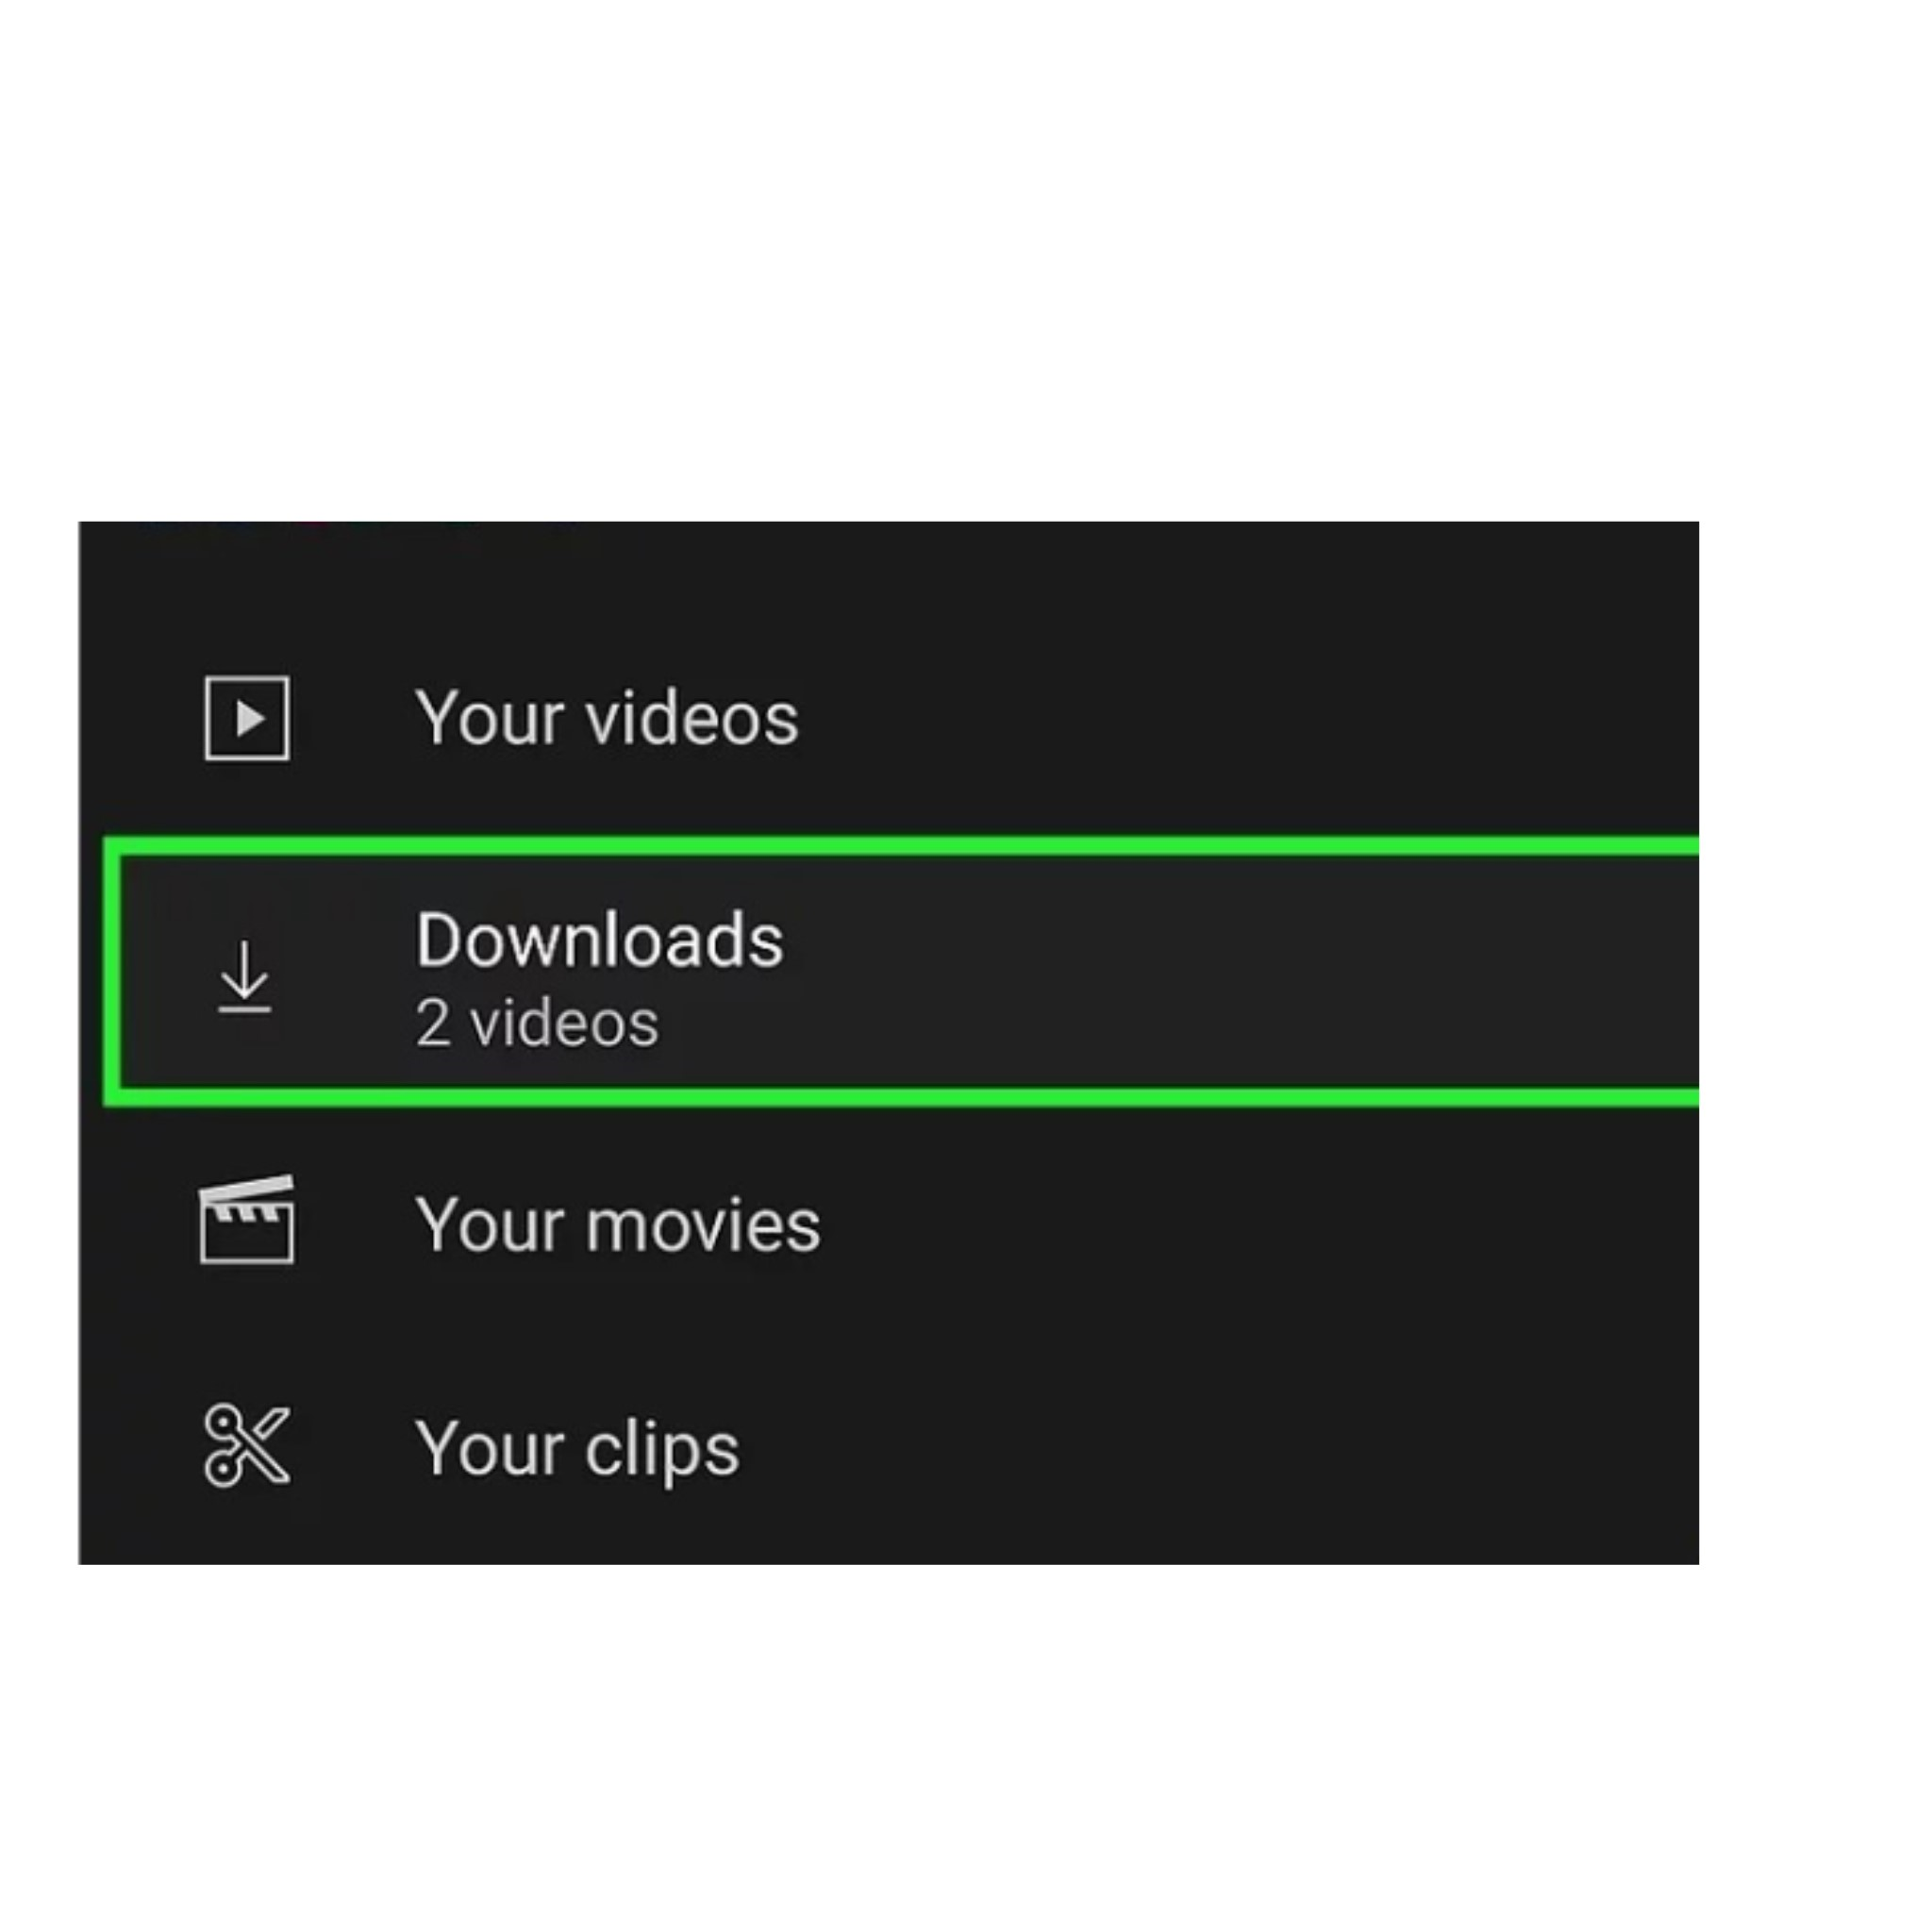 Locate the "Downloads" section